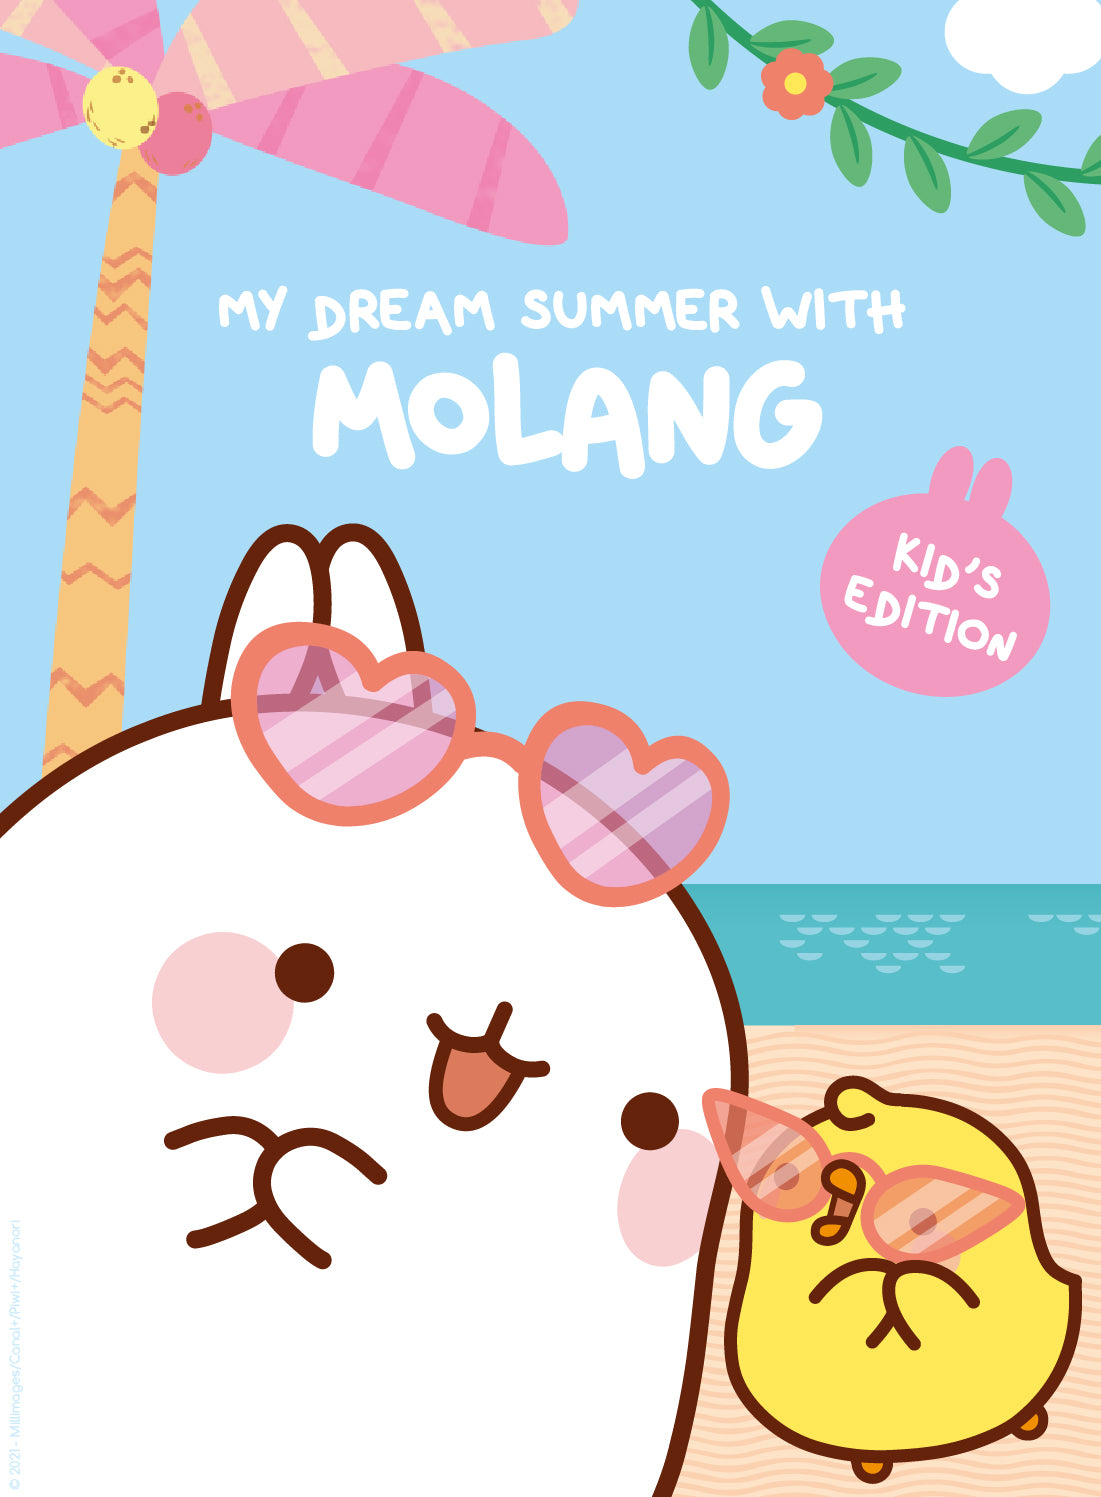 My dream summer with Molang Kids edition. Molang Official Website